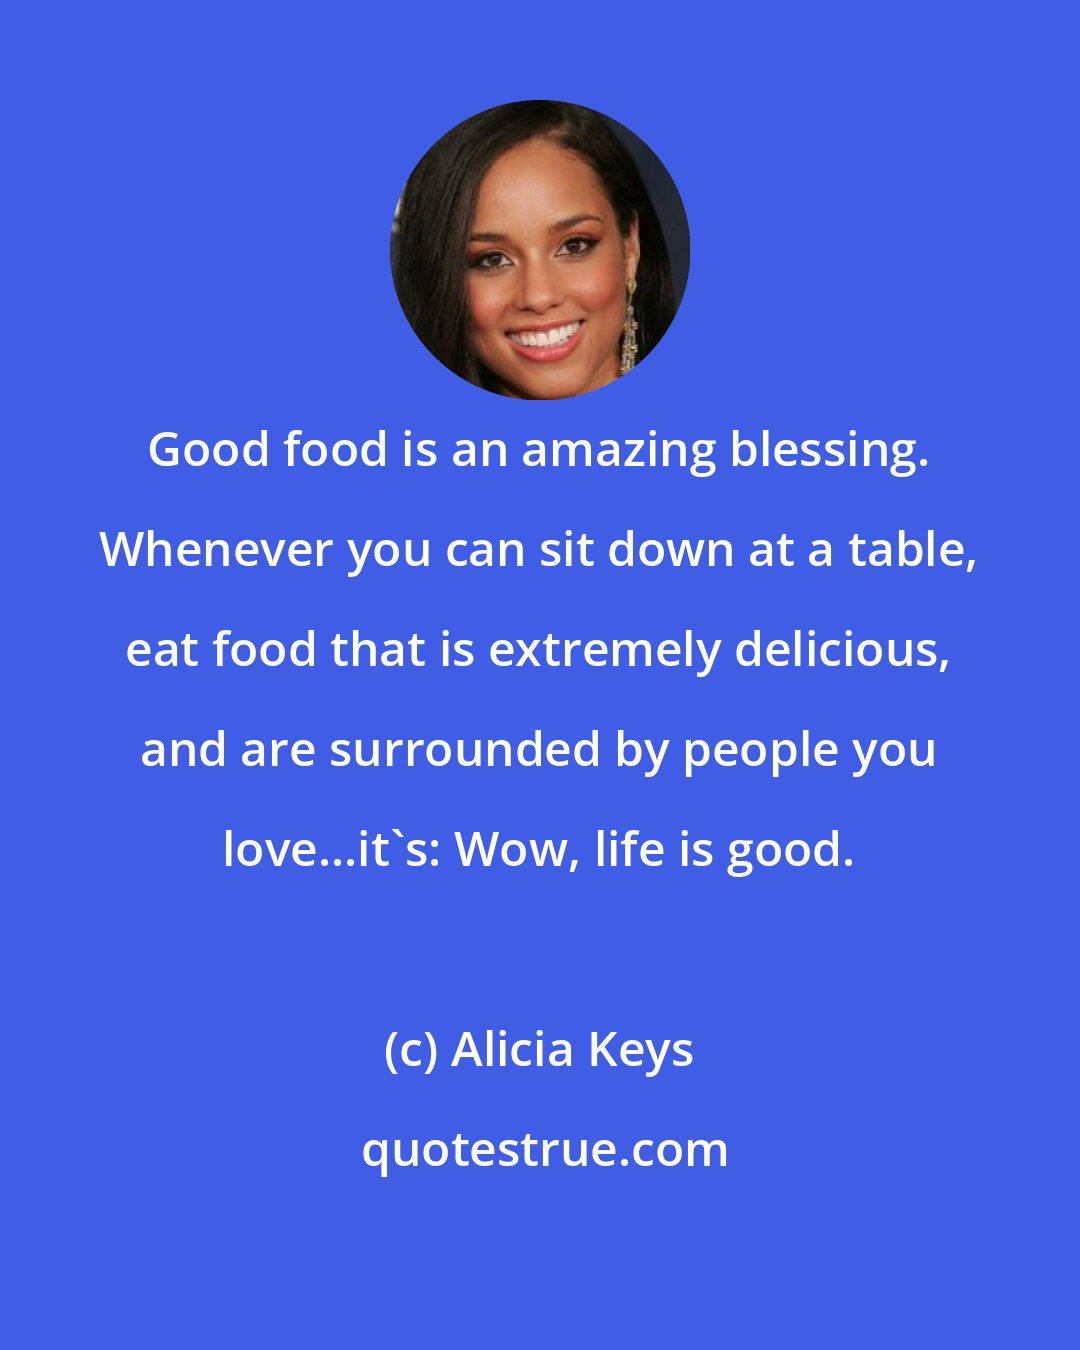 Alicia Keys: Good food is an amazing blessing. Whenever you can sit down at a table, eat food that is extremely delicious, and are surrounded by people you love...it's: Wow, life is good.